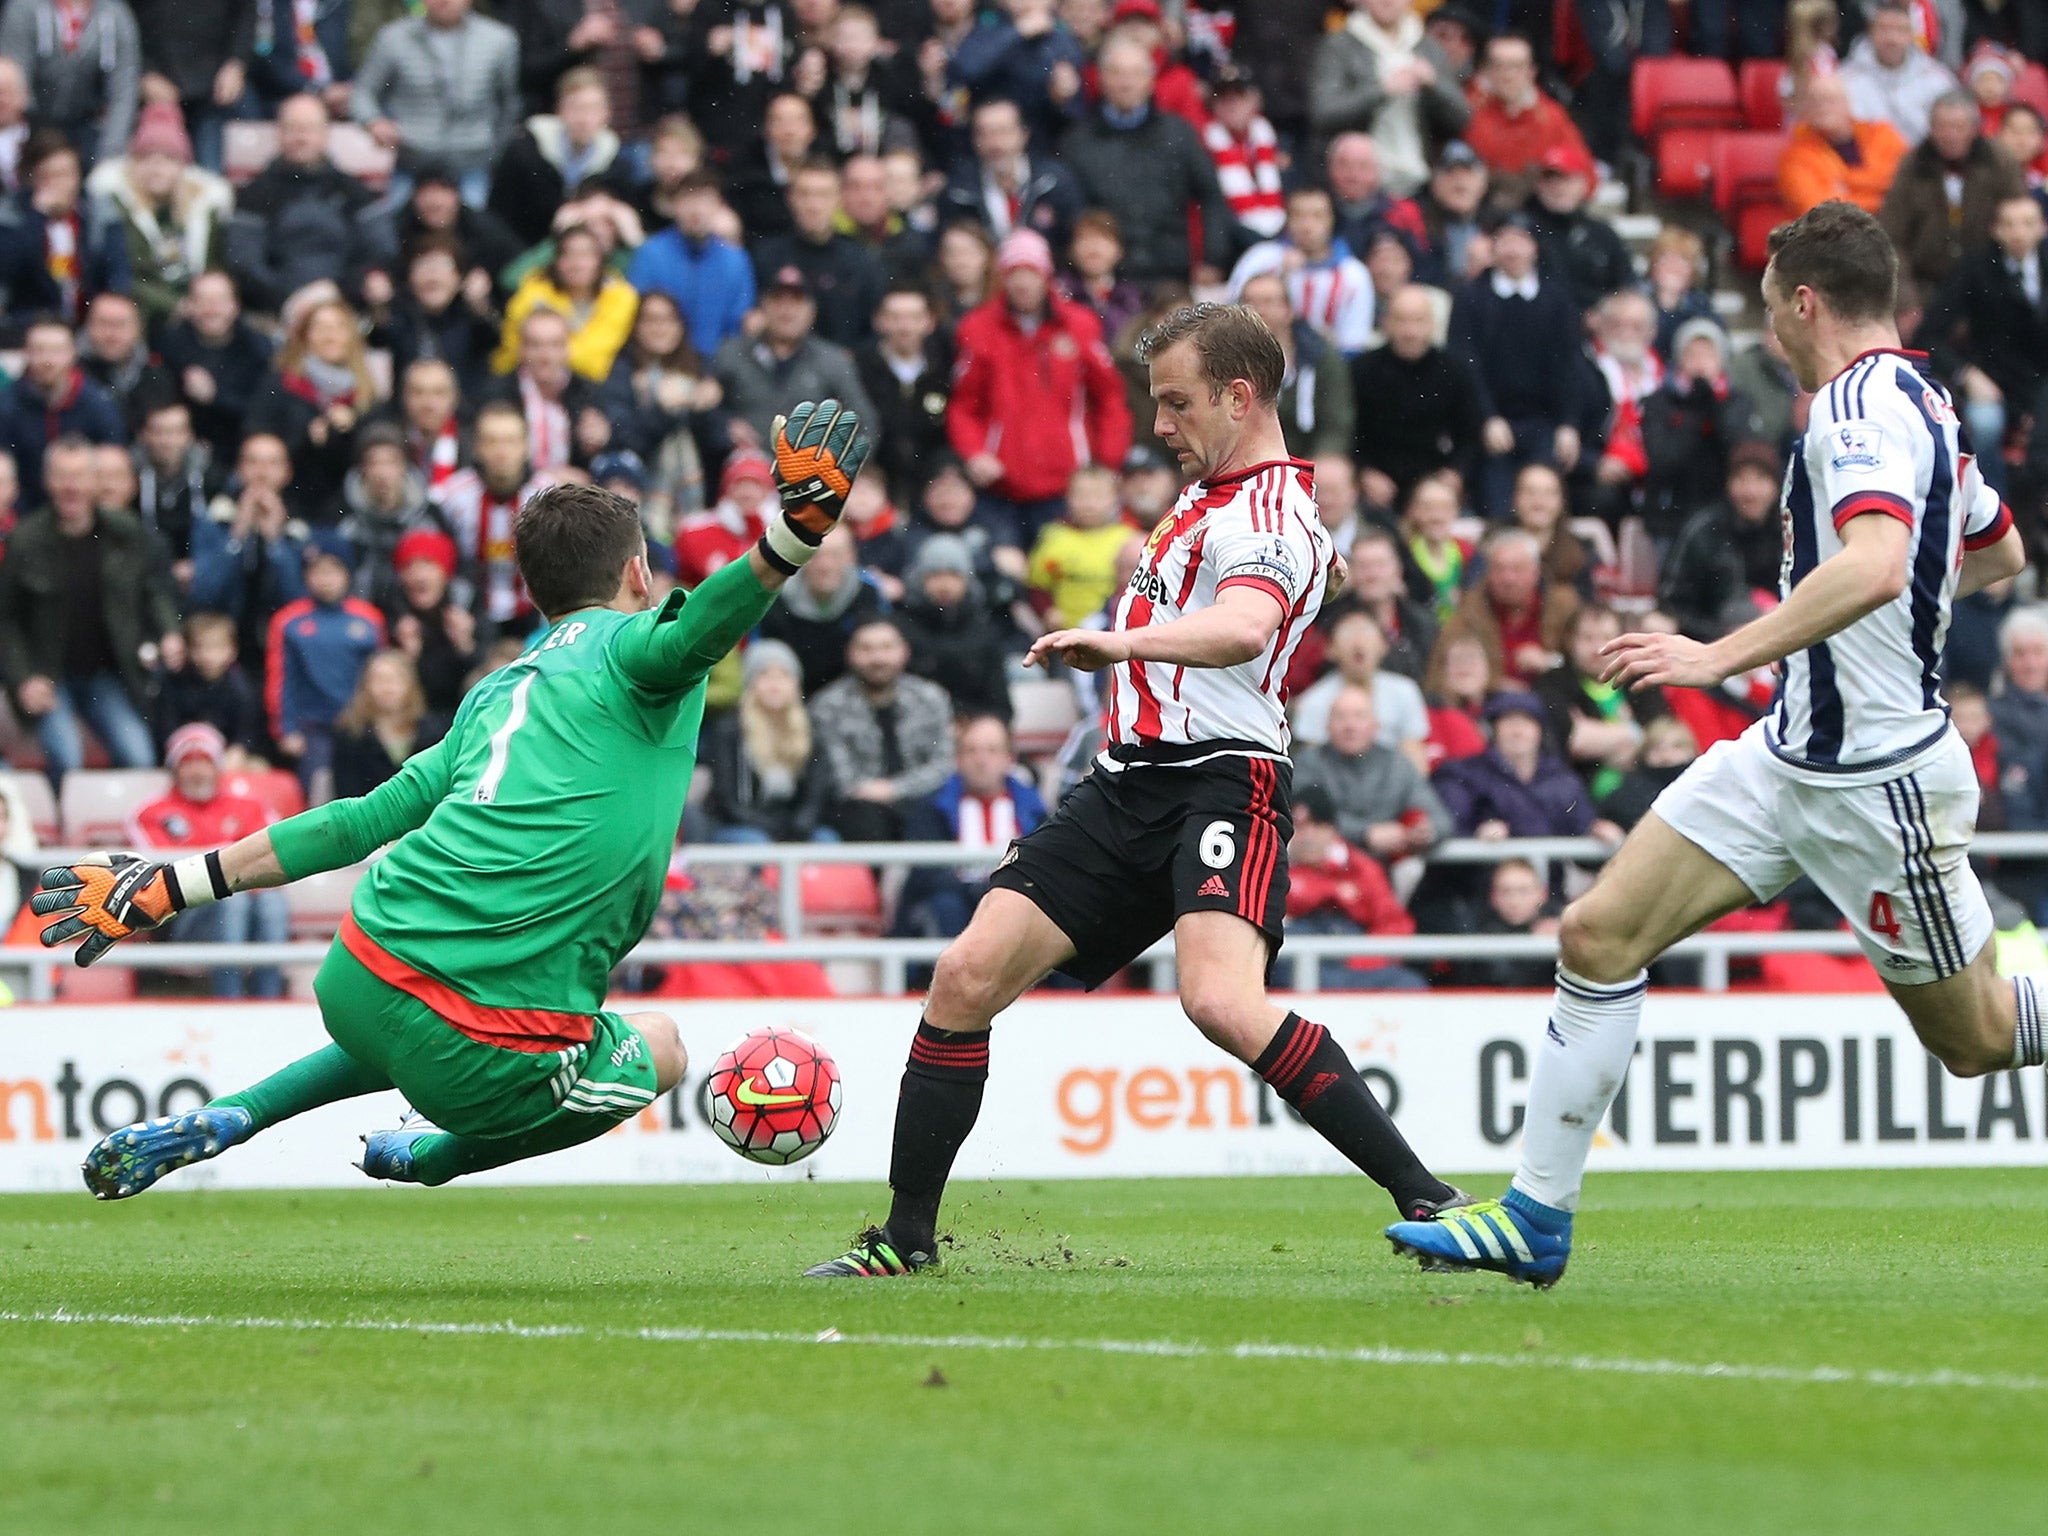 Lee Cattermole's effort is saved by West Brom goalkeeper Ben Foster